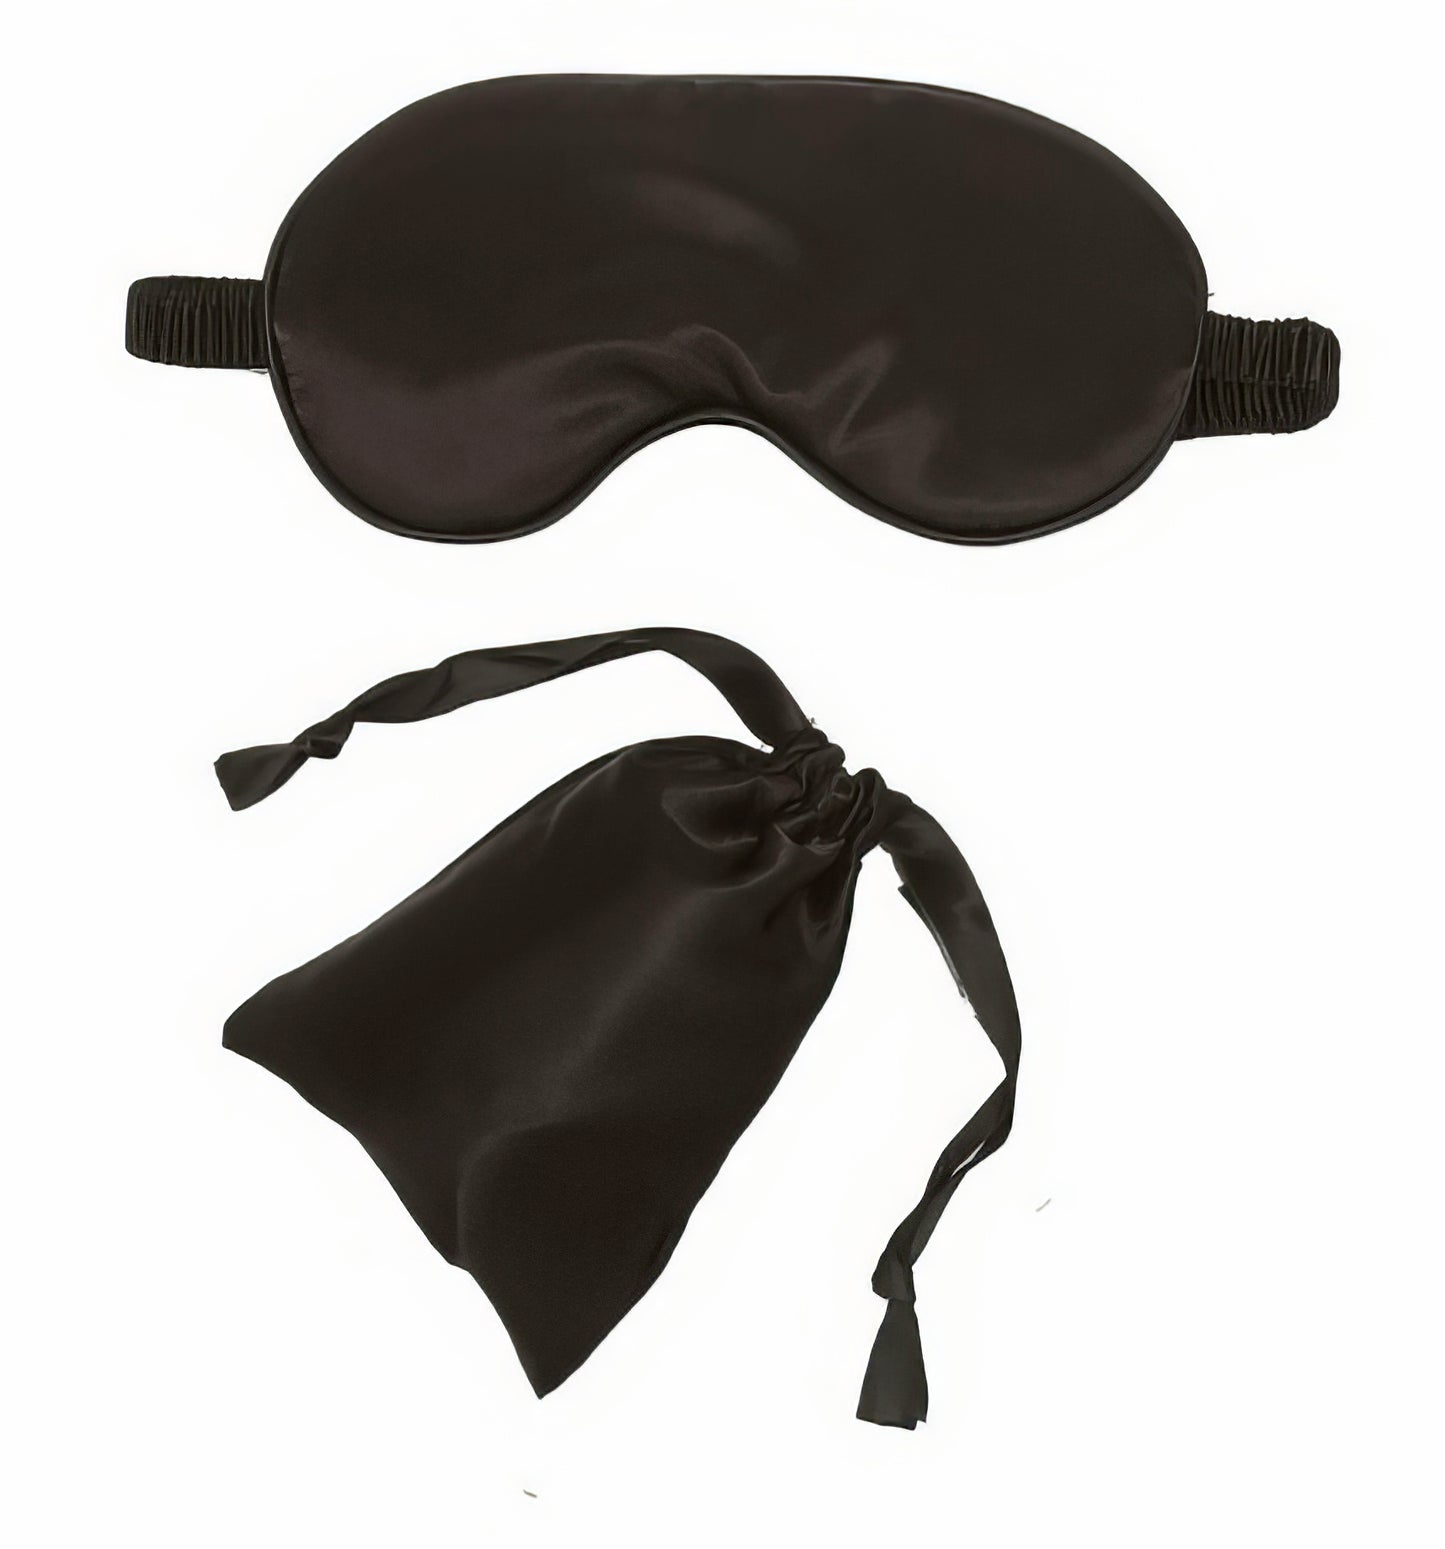 Silk Cotton Sleeping Mask in Midnight Black with Bag